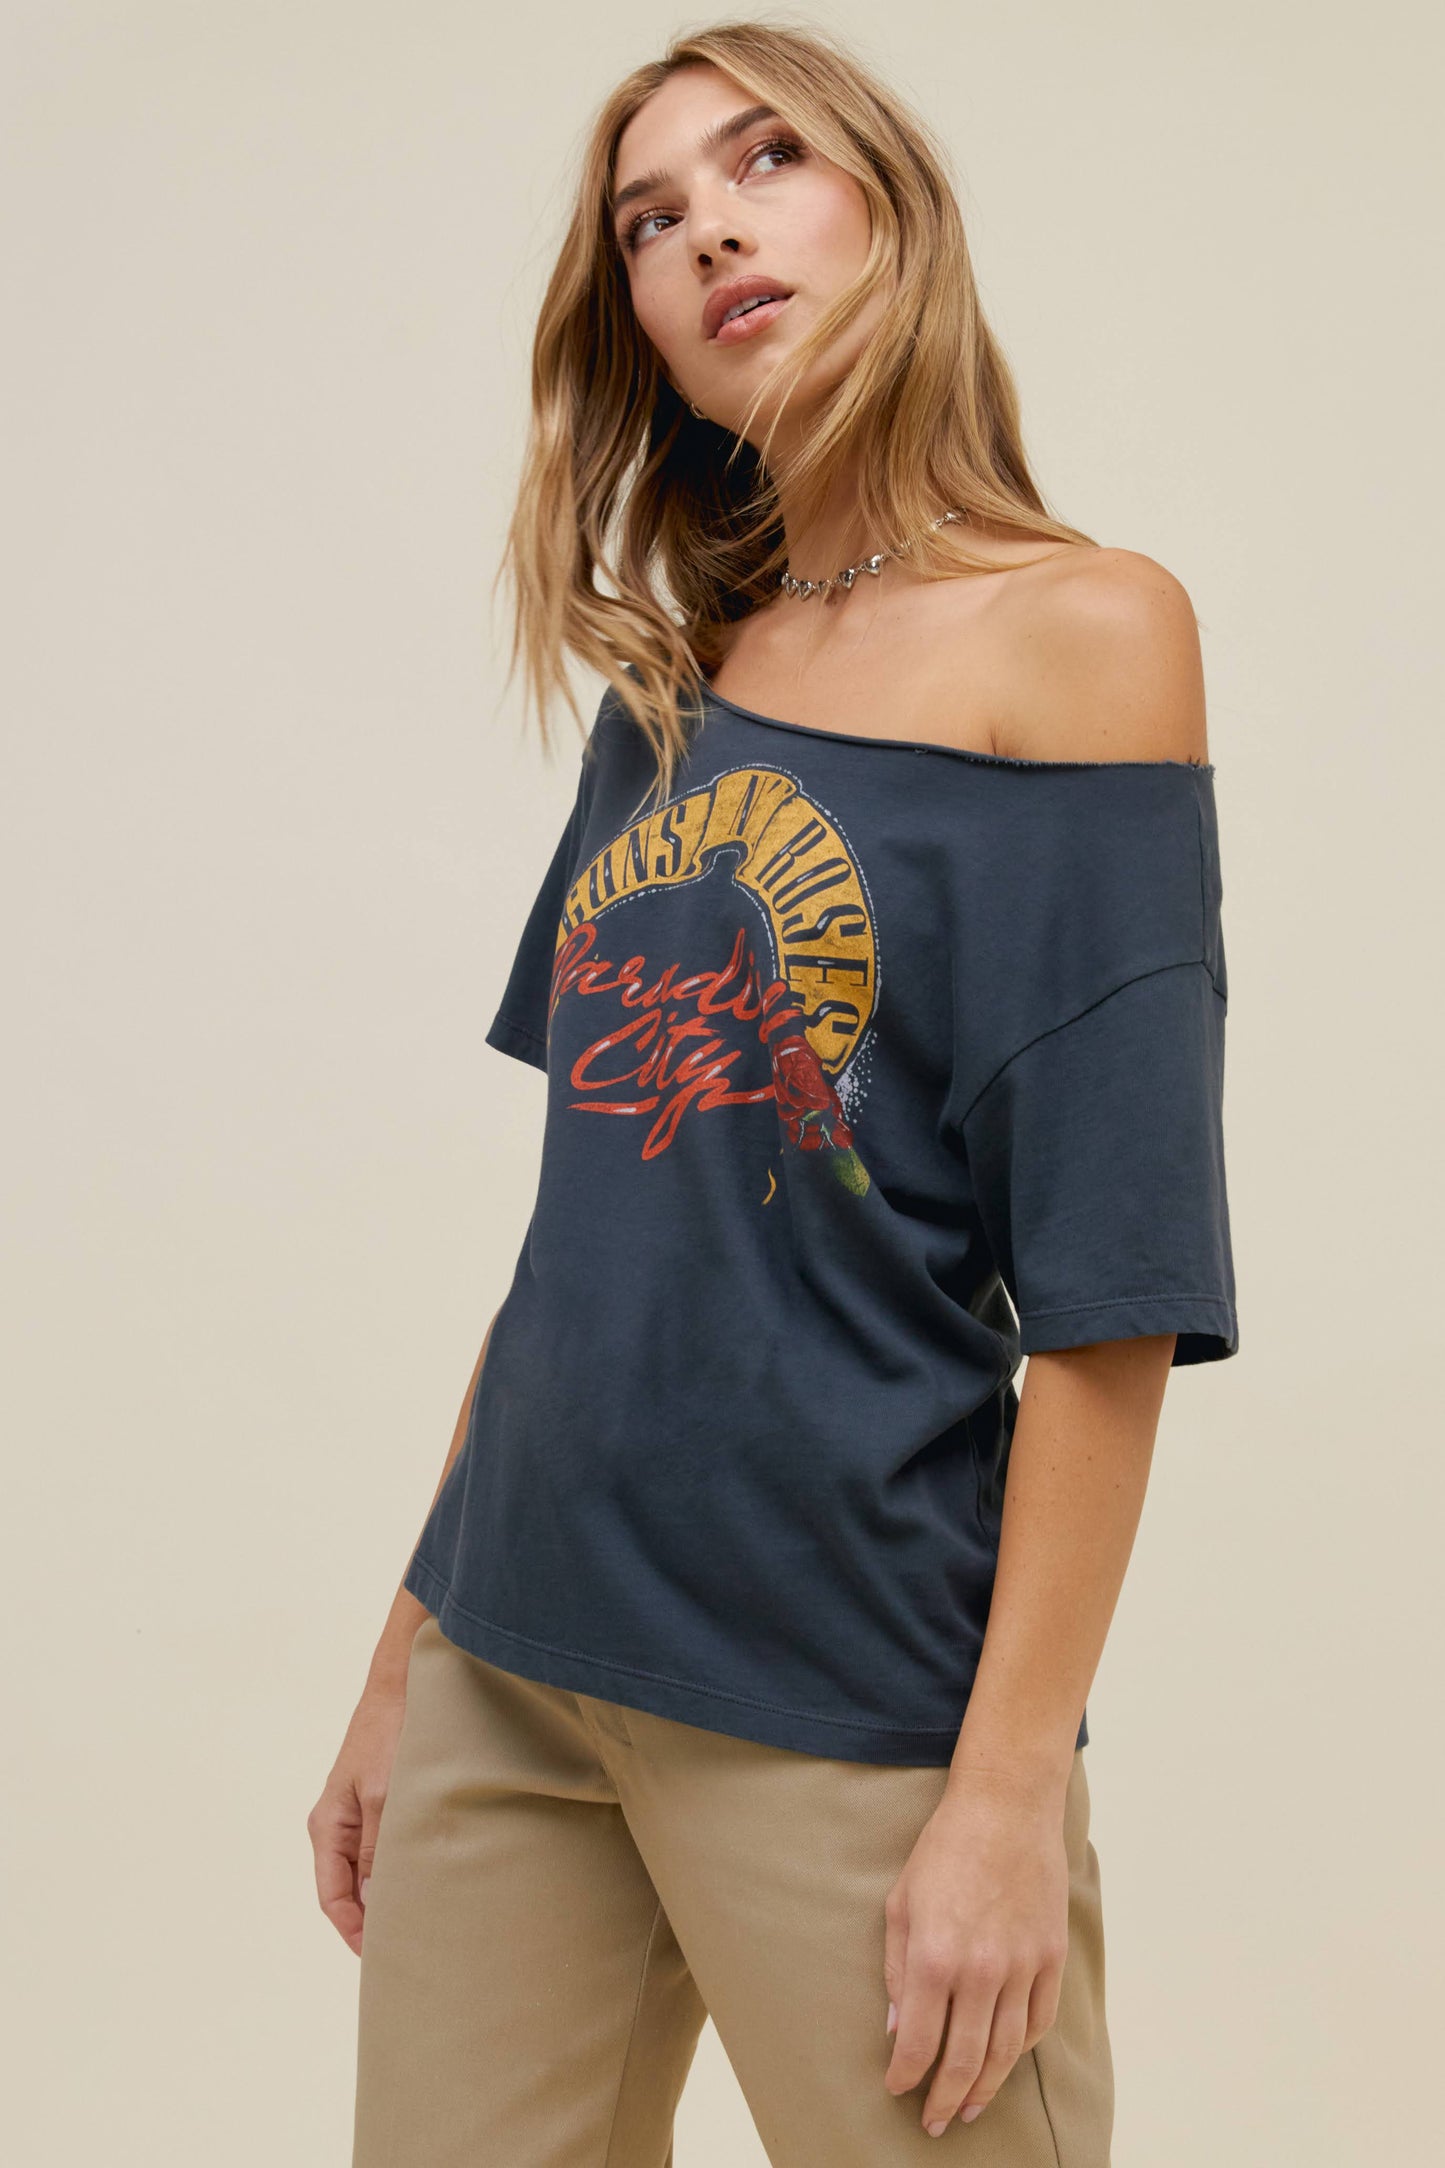 Blonde haired model featuring a vintage-inspired fit off shoulder tee.